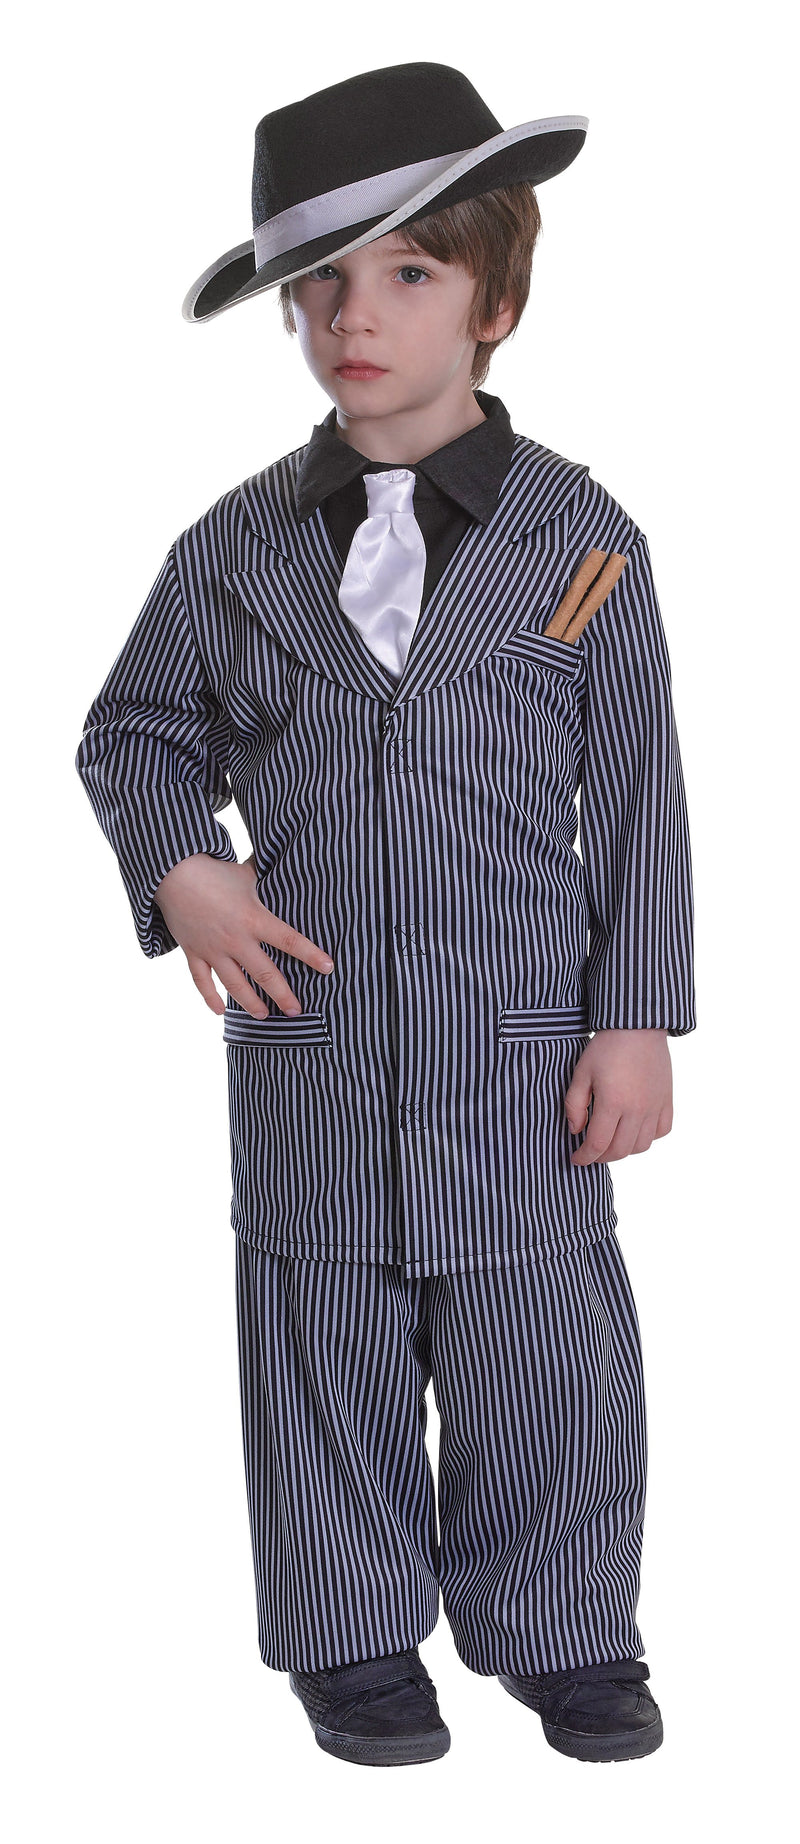 Gangster Boy Costume S Childrens Costumes Male Small Boys Bristol Novelty Childrens Costumes 2203